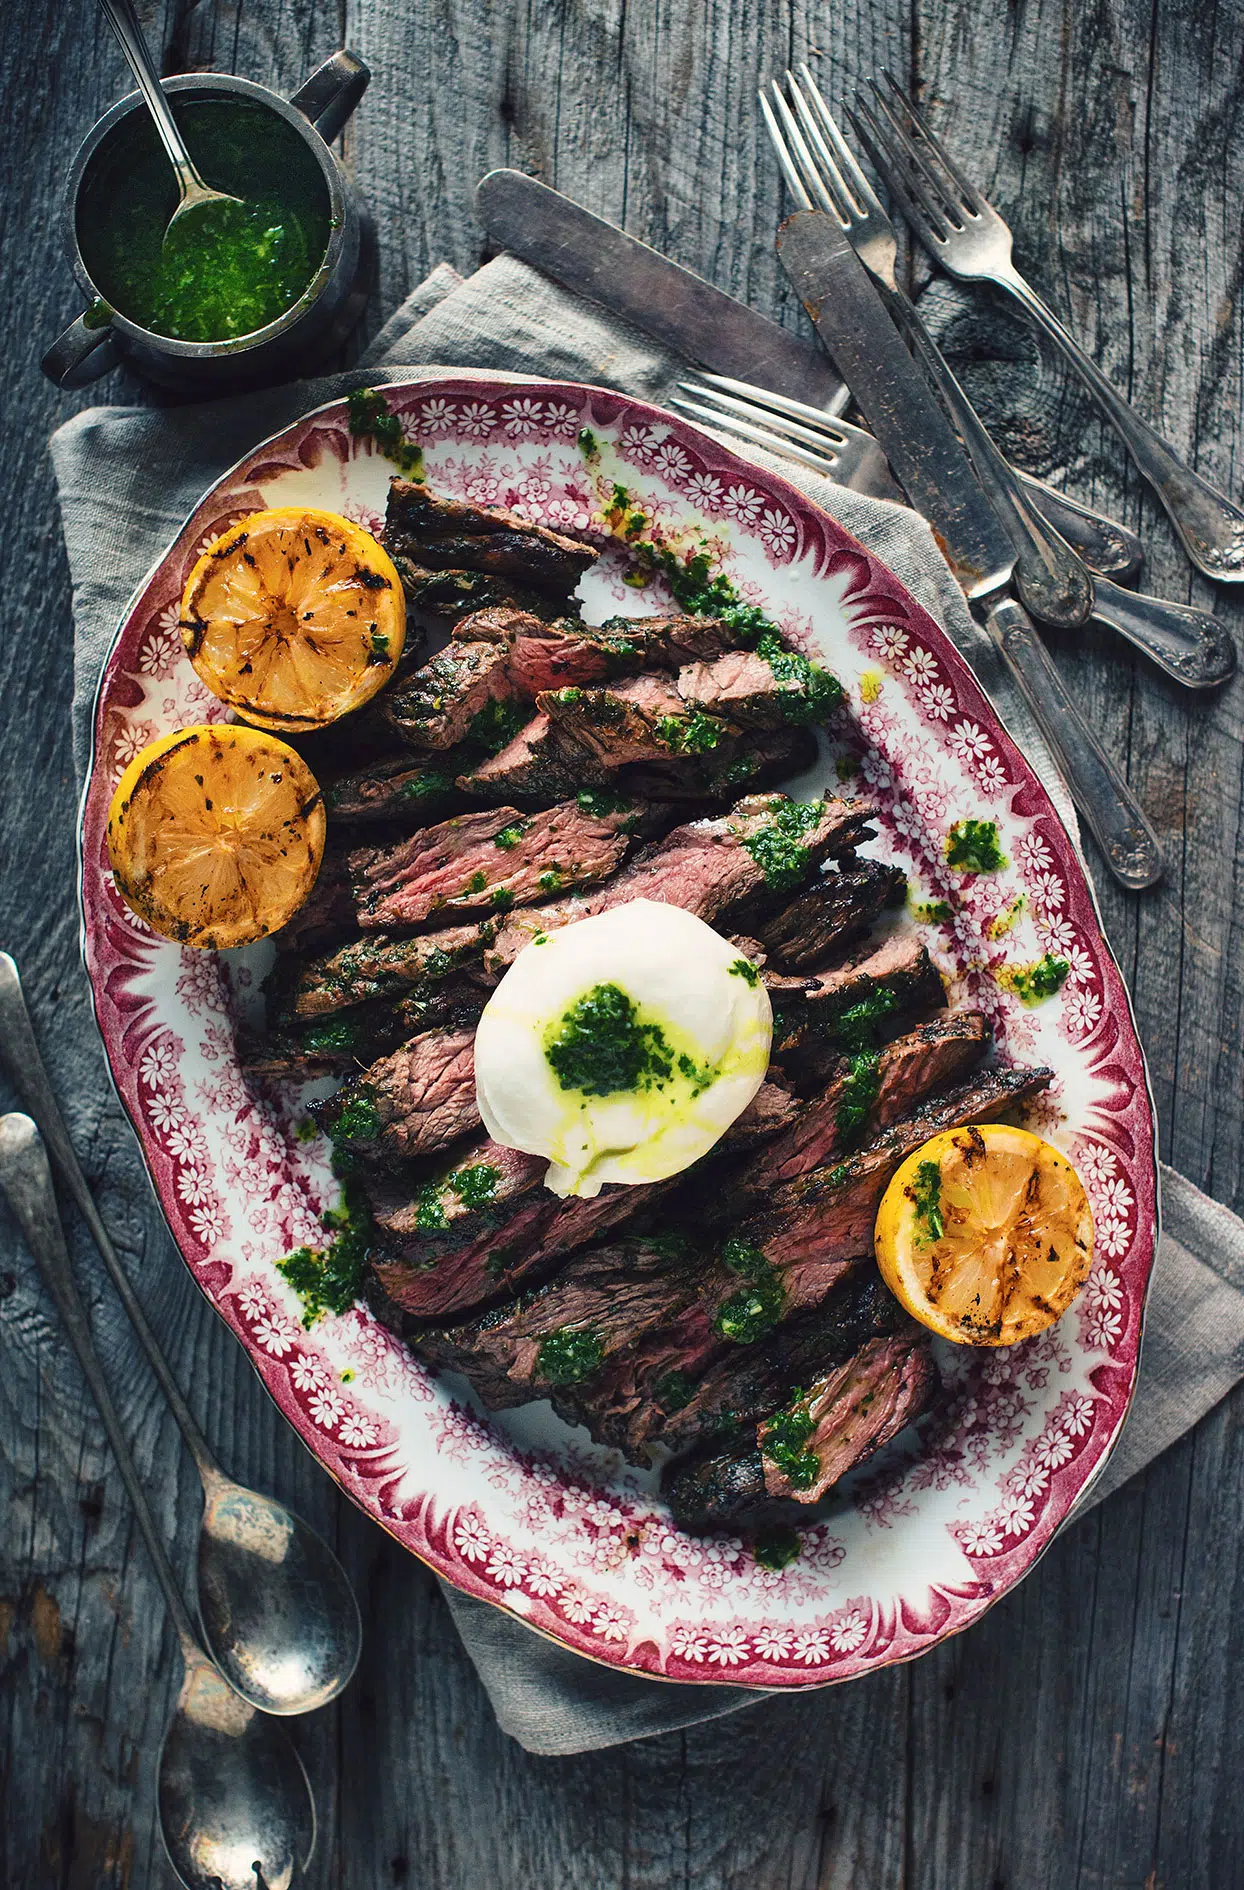 Flank steak with sauce verte and Blanche de Chambly marinade, buratta cheese and grilled lemons